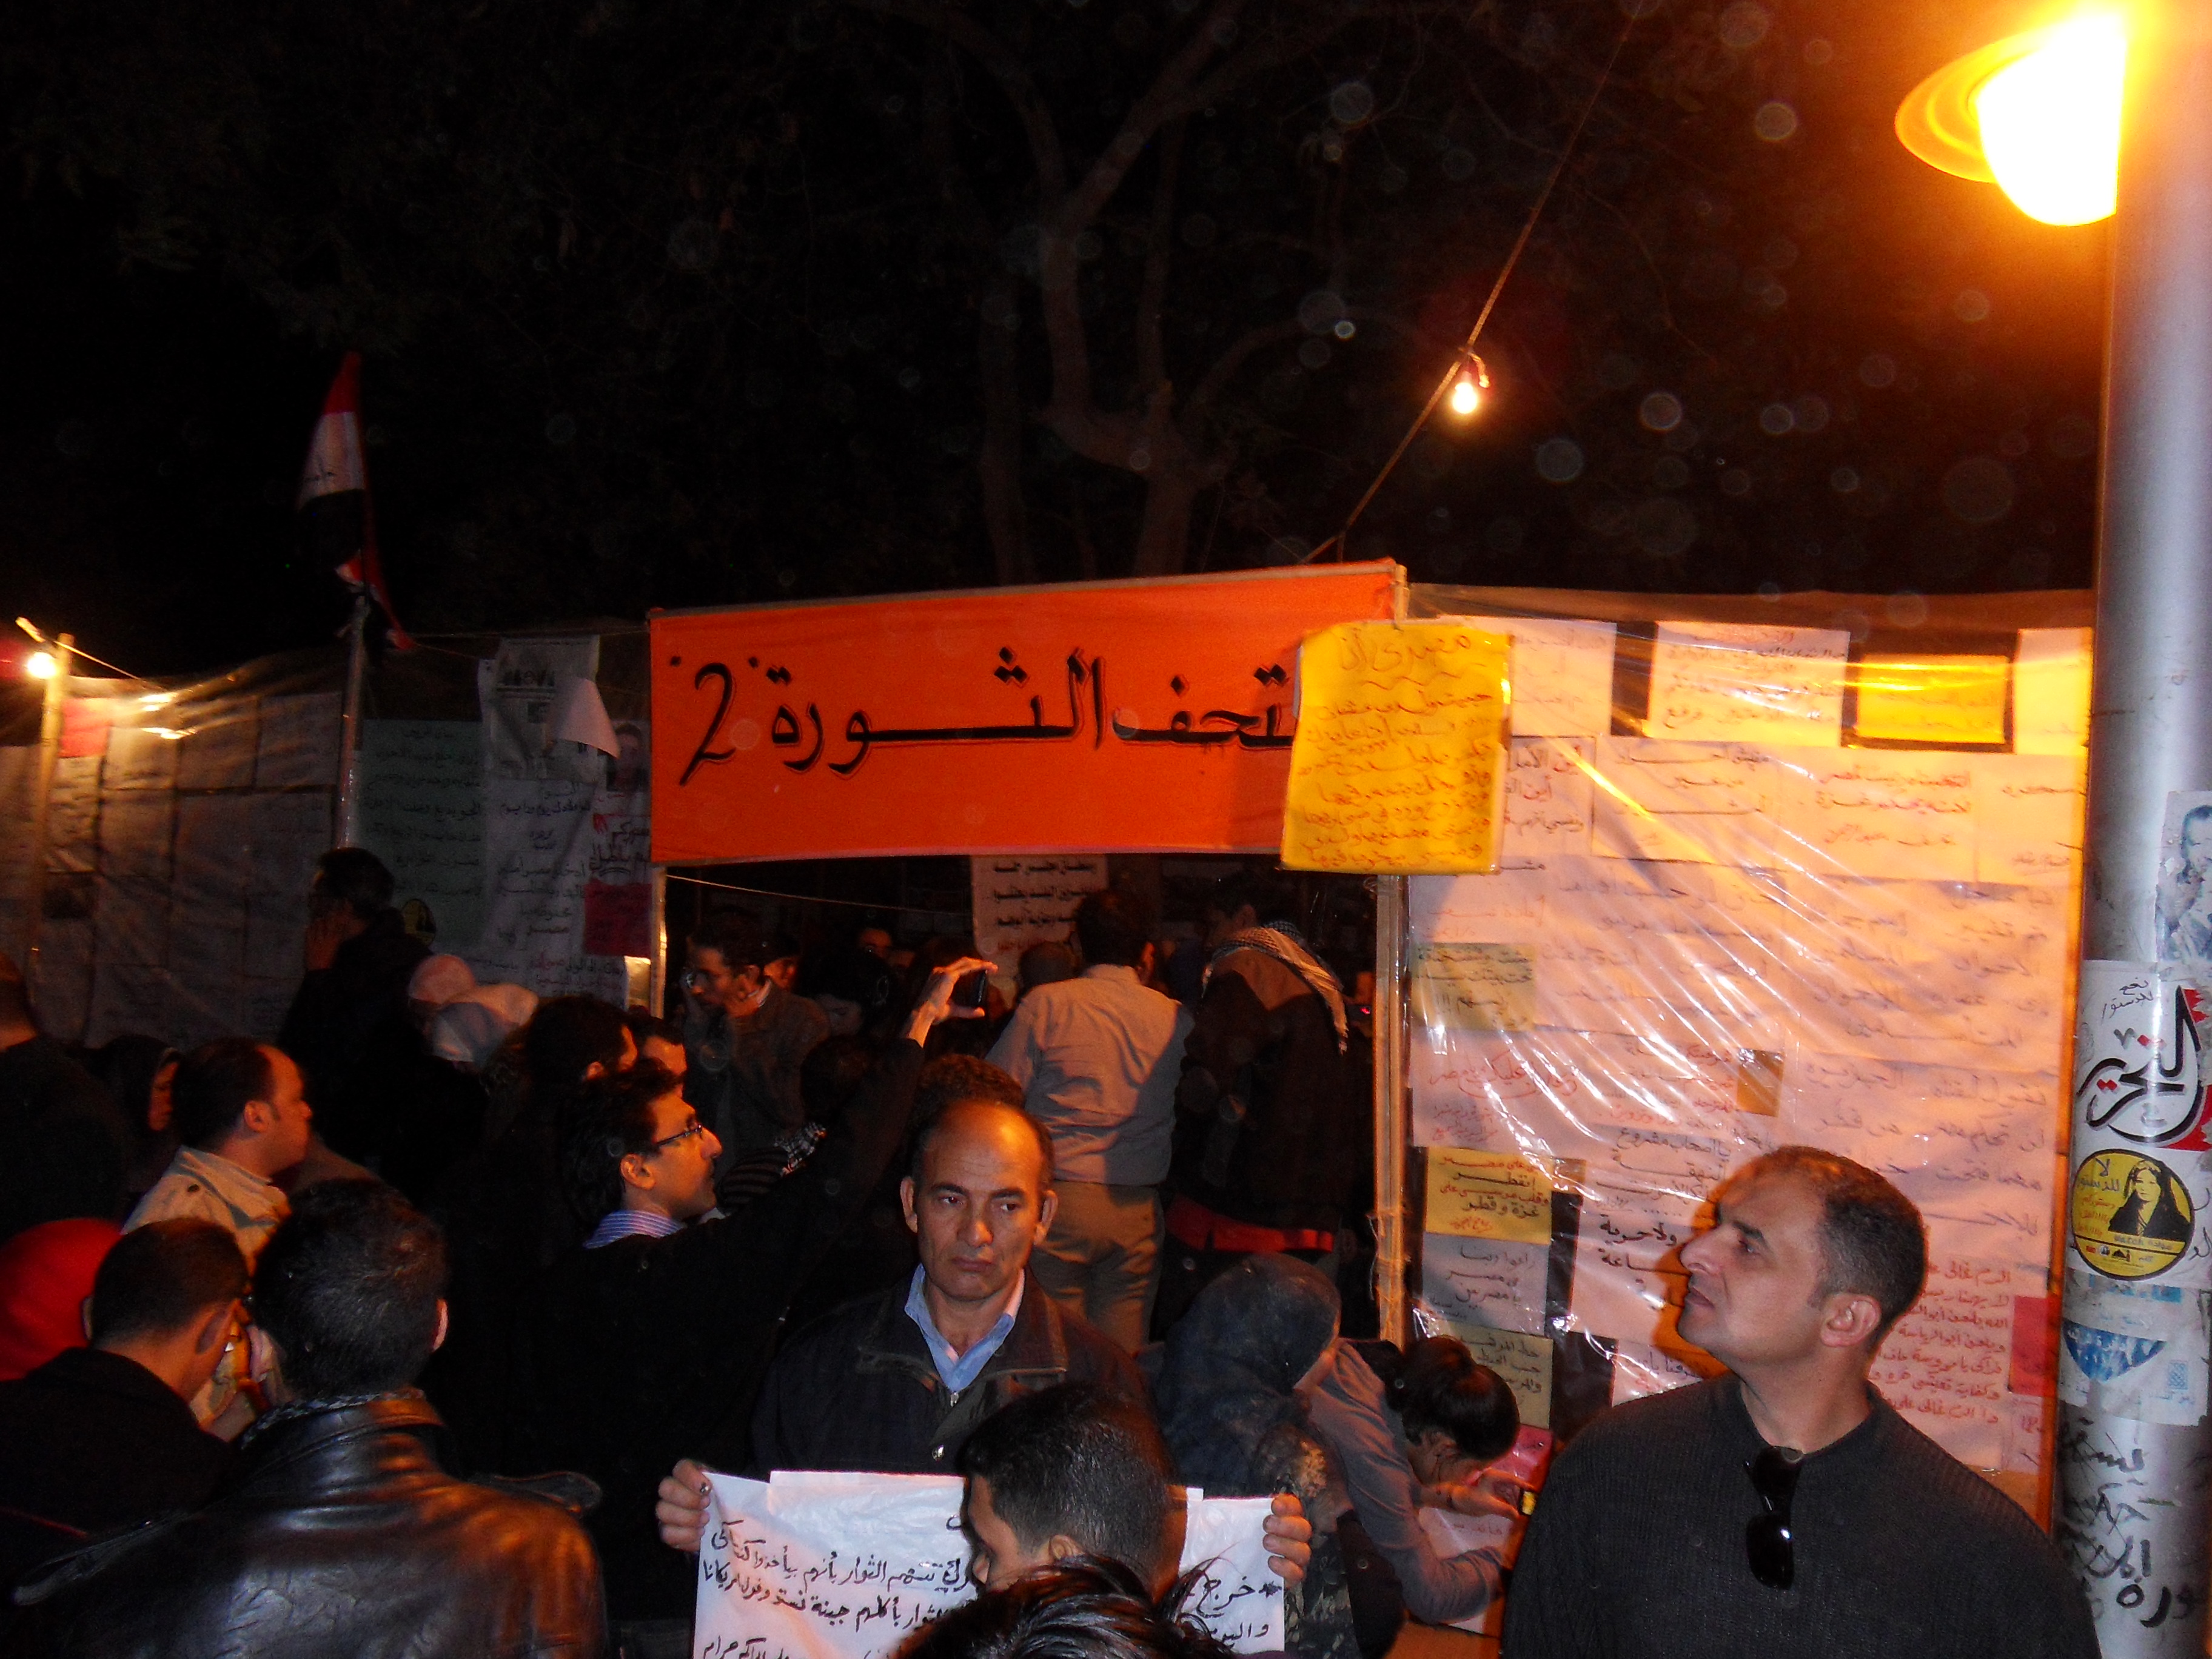 A 'Museum' of the revolution was set up outside the Presidential Palace and attracted large crowds of curious protesters.